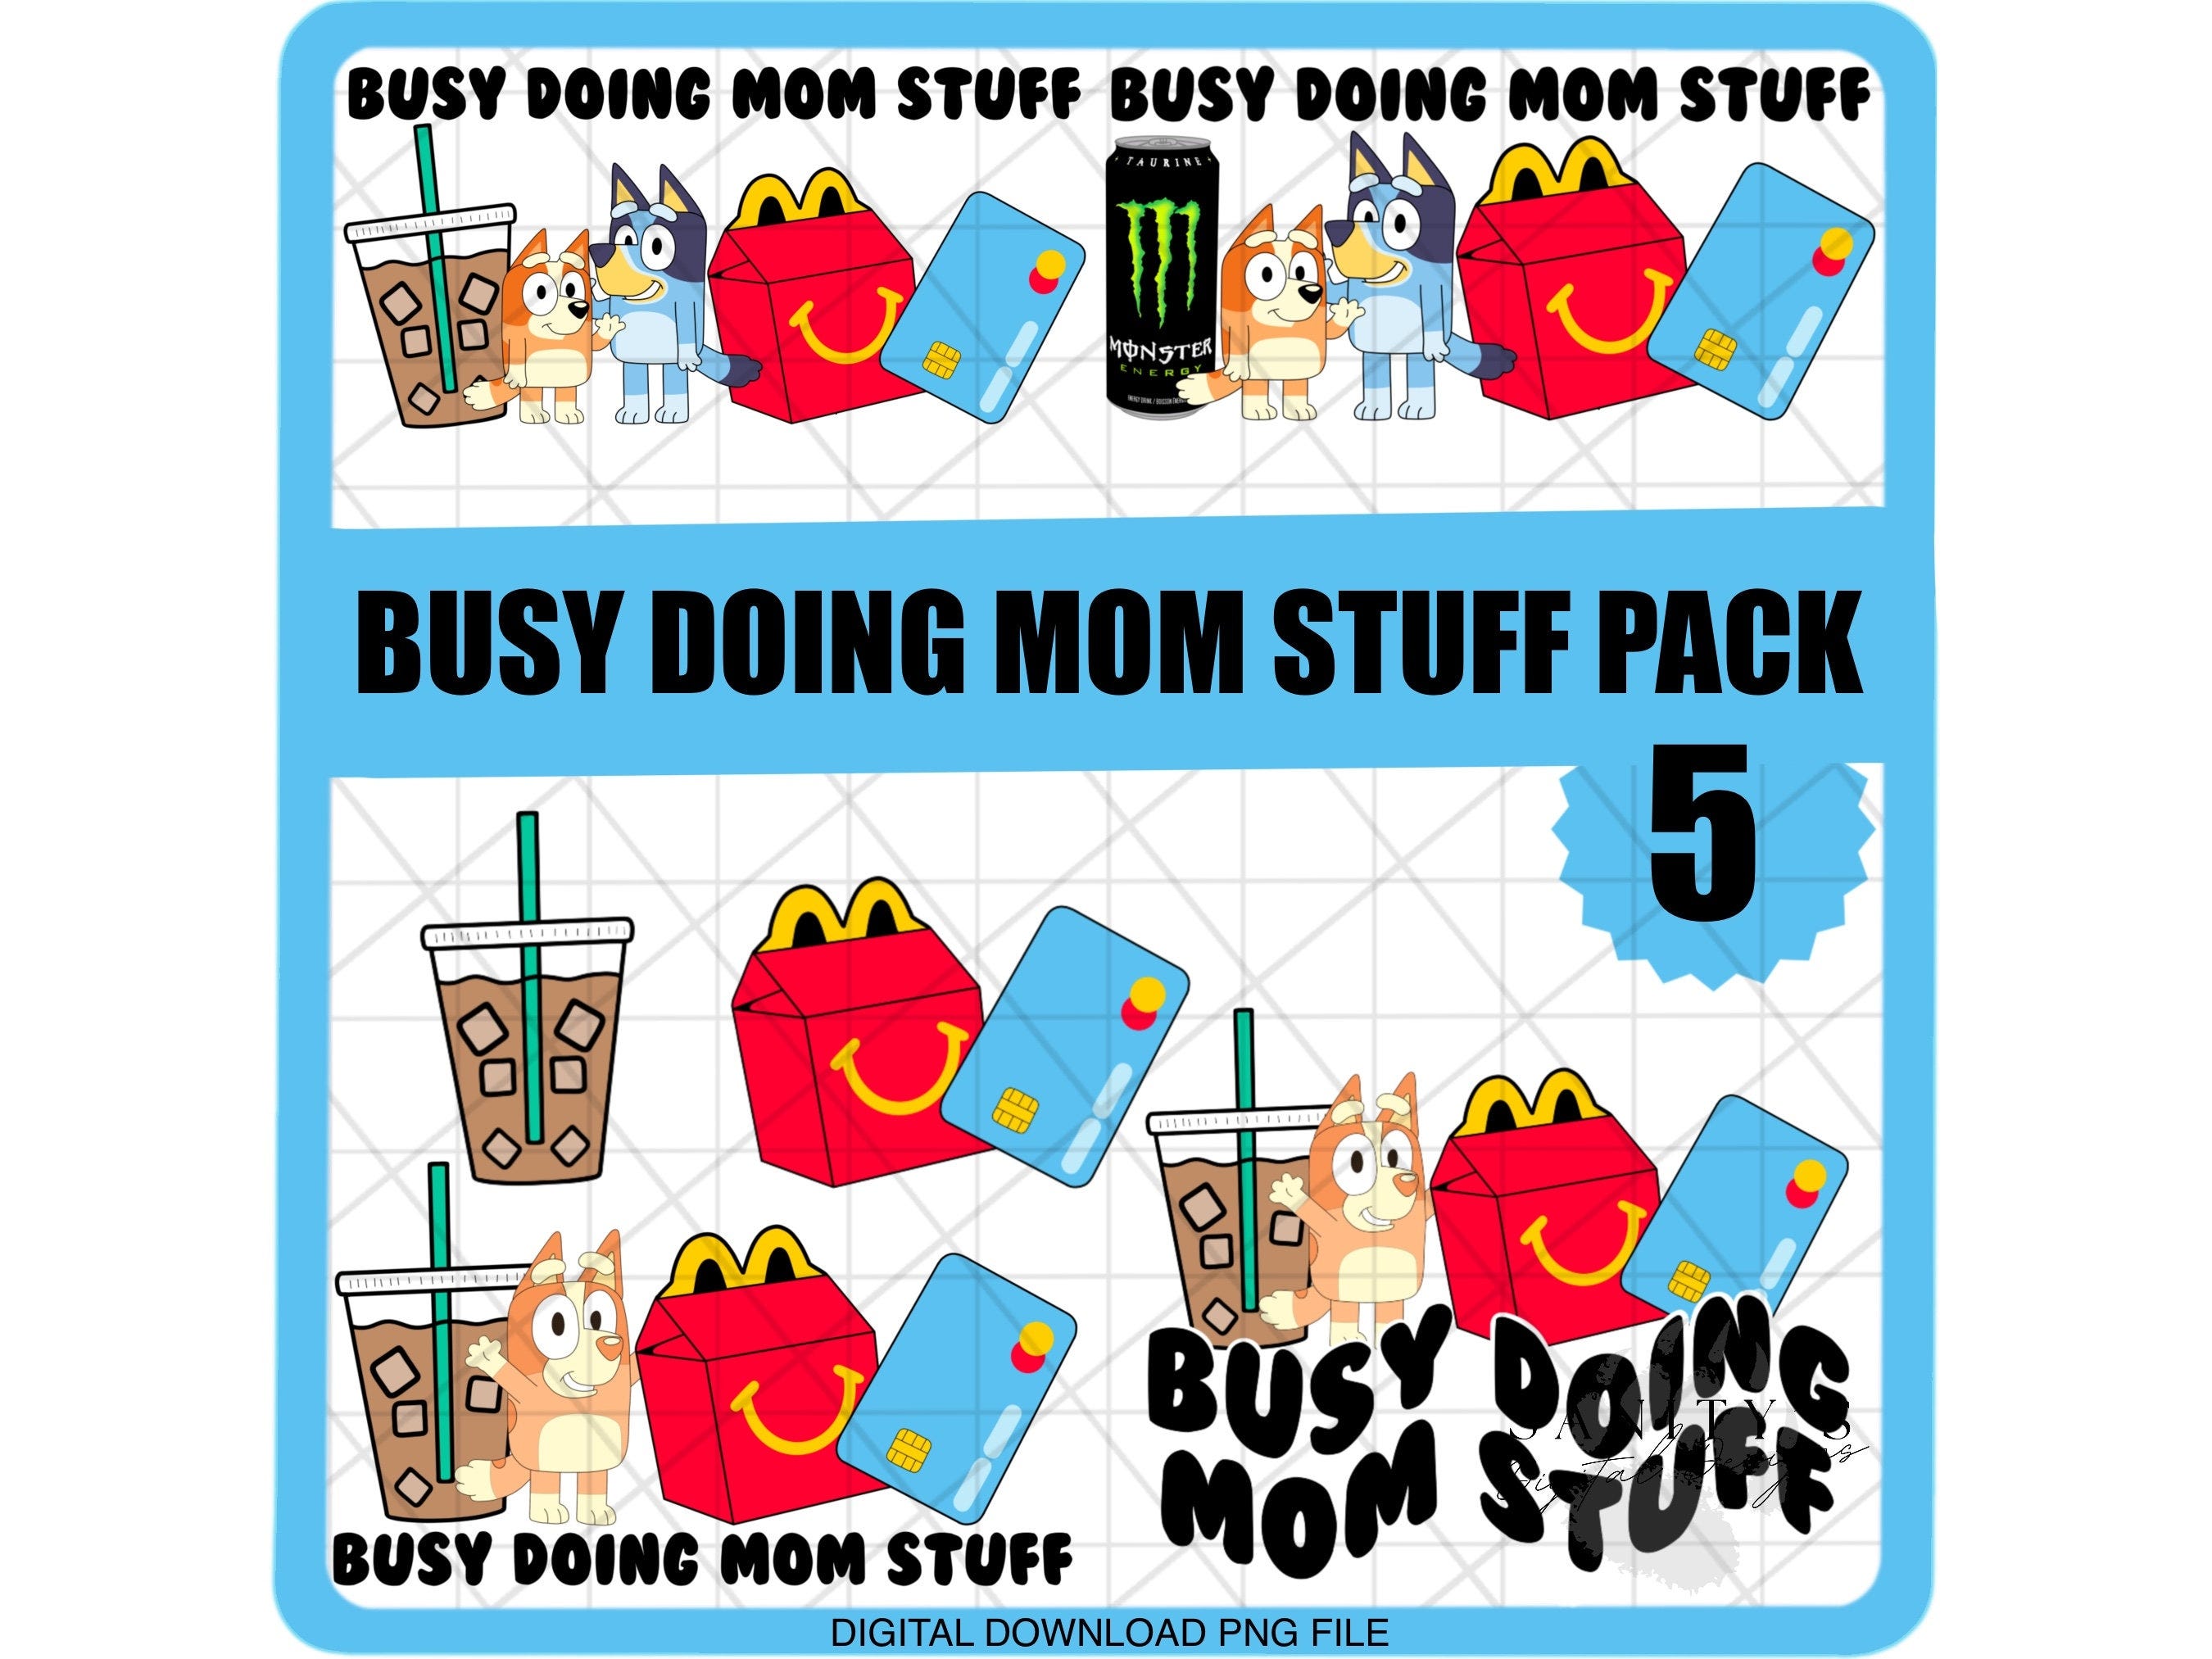 Busy doing mom stuff png, Mom, Instant Download, 5 Bundle, Wavy Letters, PNG Digital File